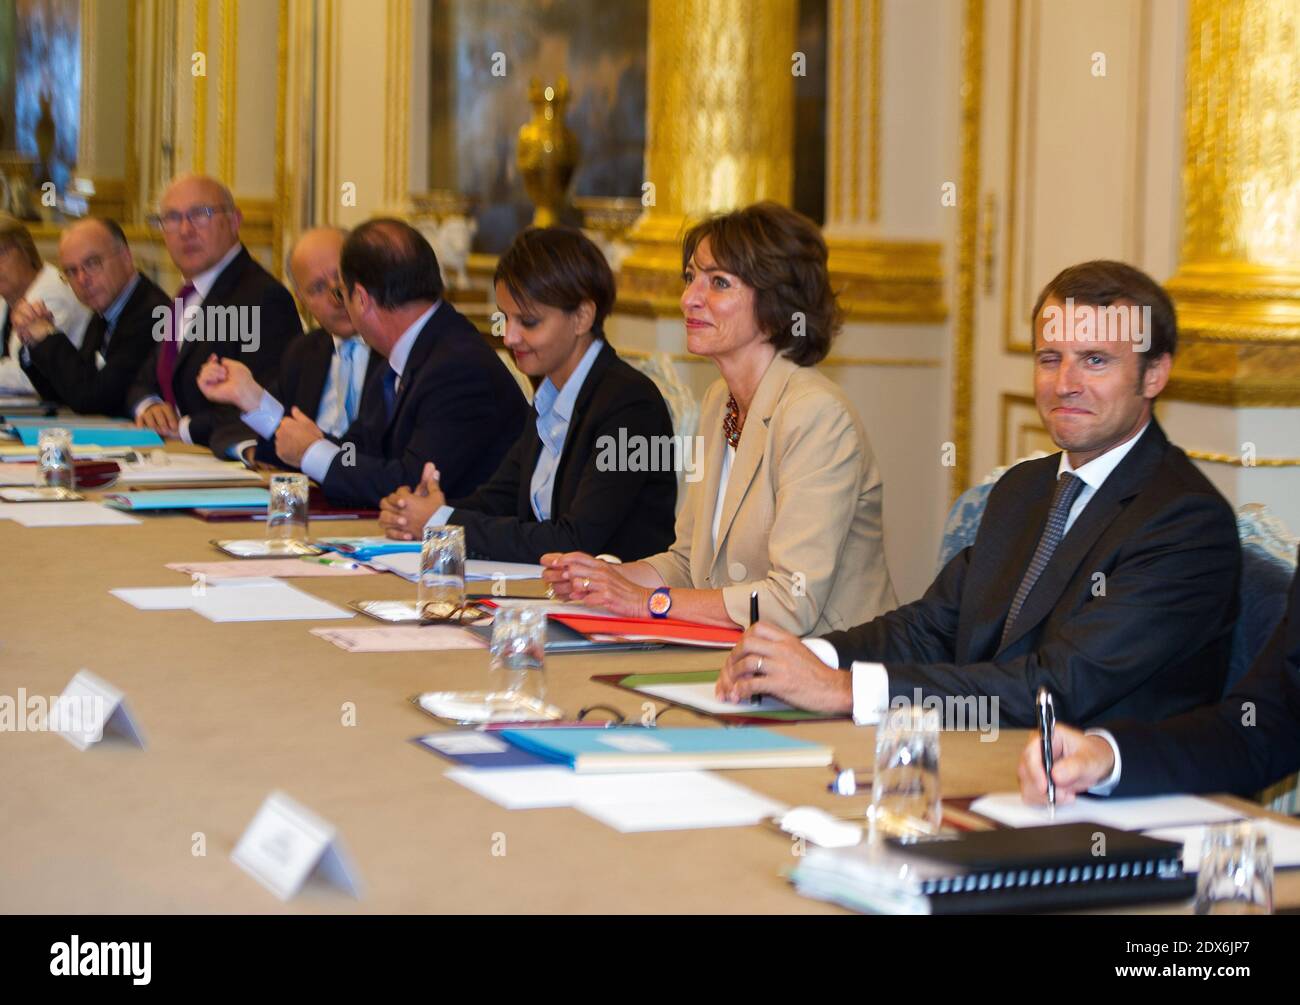 President Francois Hollande, Najat Vallaud-Belkacem, Marisol Touraine and Emmanuel Macron attend the weekly cabinet meeting at the Elysee presidential palace in Paris, France, August 27, 2014. Hollande installed a former Banker Emmanuel Macron, a 36-year-old ex-Rothschild banker and architect of the president's economic policy. Photo Thierry Orban/ABACAPRESS.COM Stock Photo